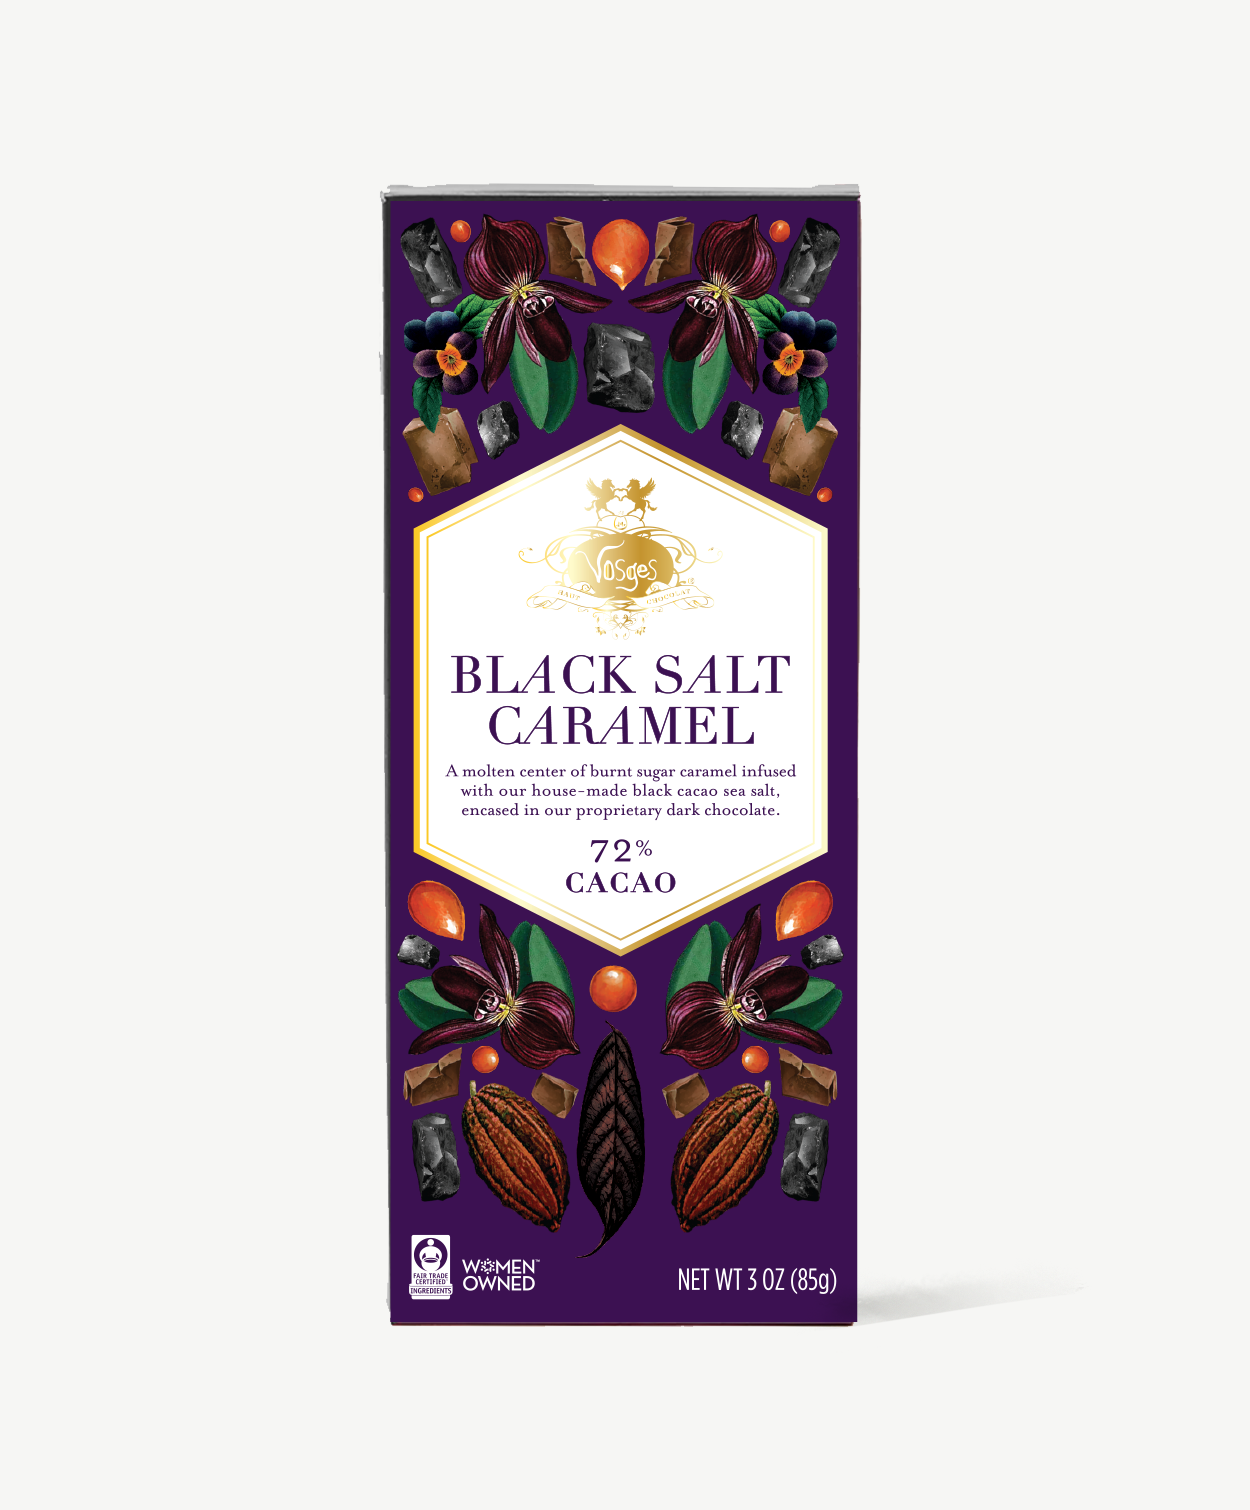 Vosges Black Salt Caramel bar in box displaying colorful illustrations of salt crystals and cacao pods on a white background.